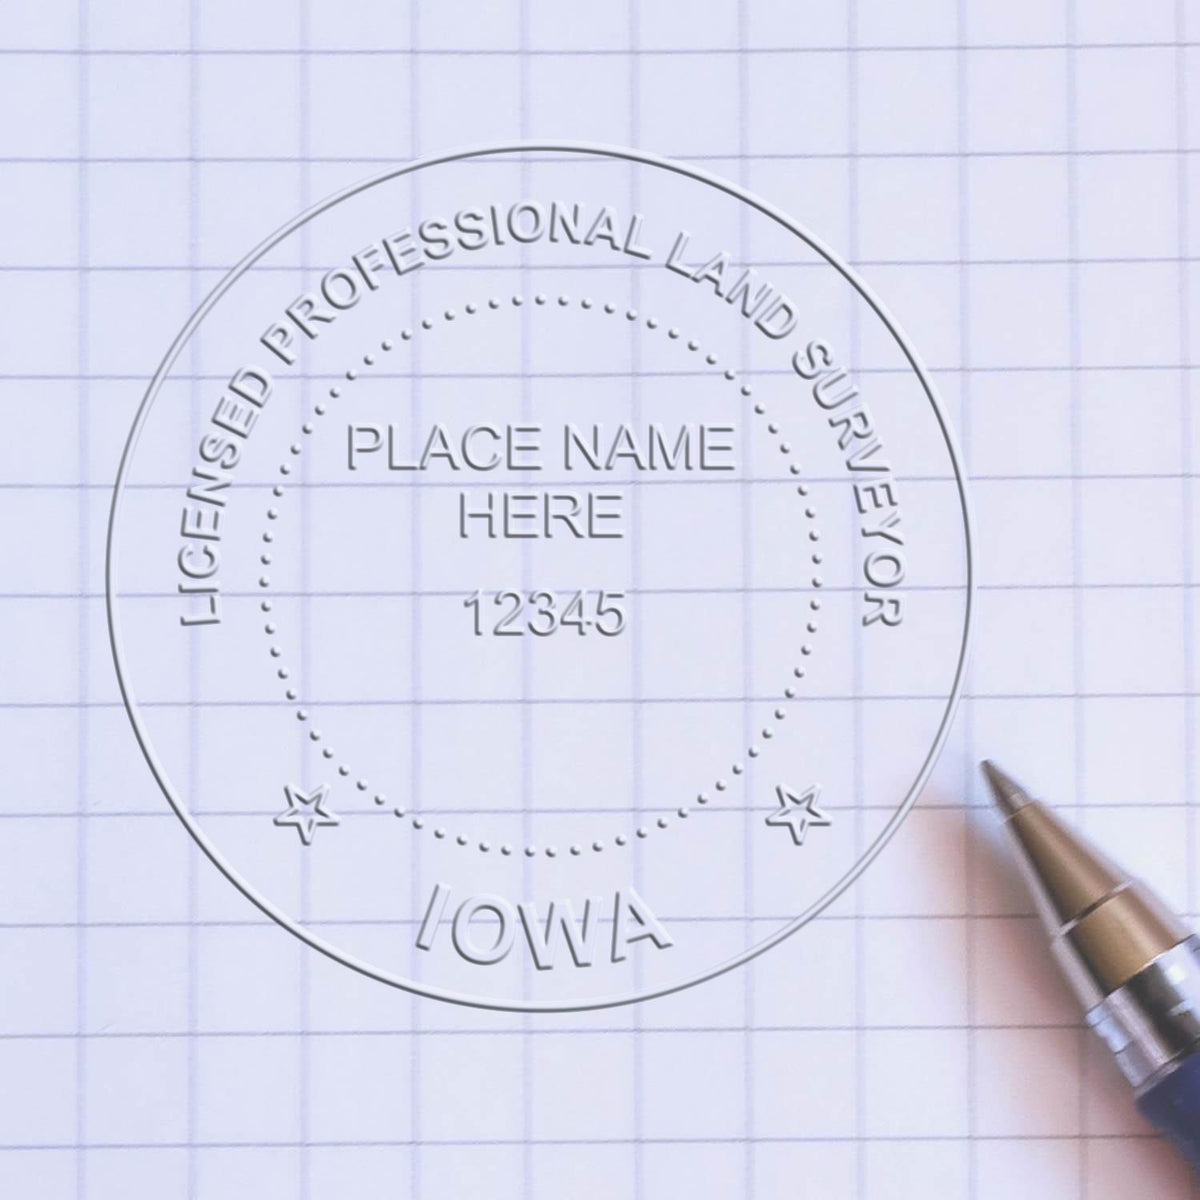 The Long Reach Iowa Land Surveyor Seal stamp impression comes to life with a crisp, detailed photo on paper - showcasing true professional quality.